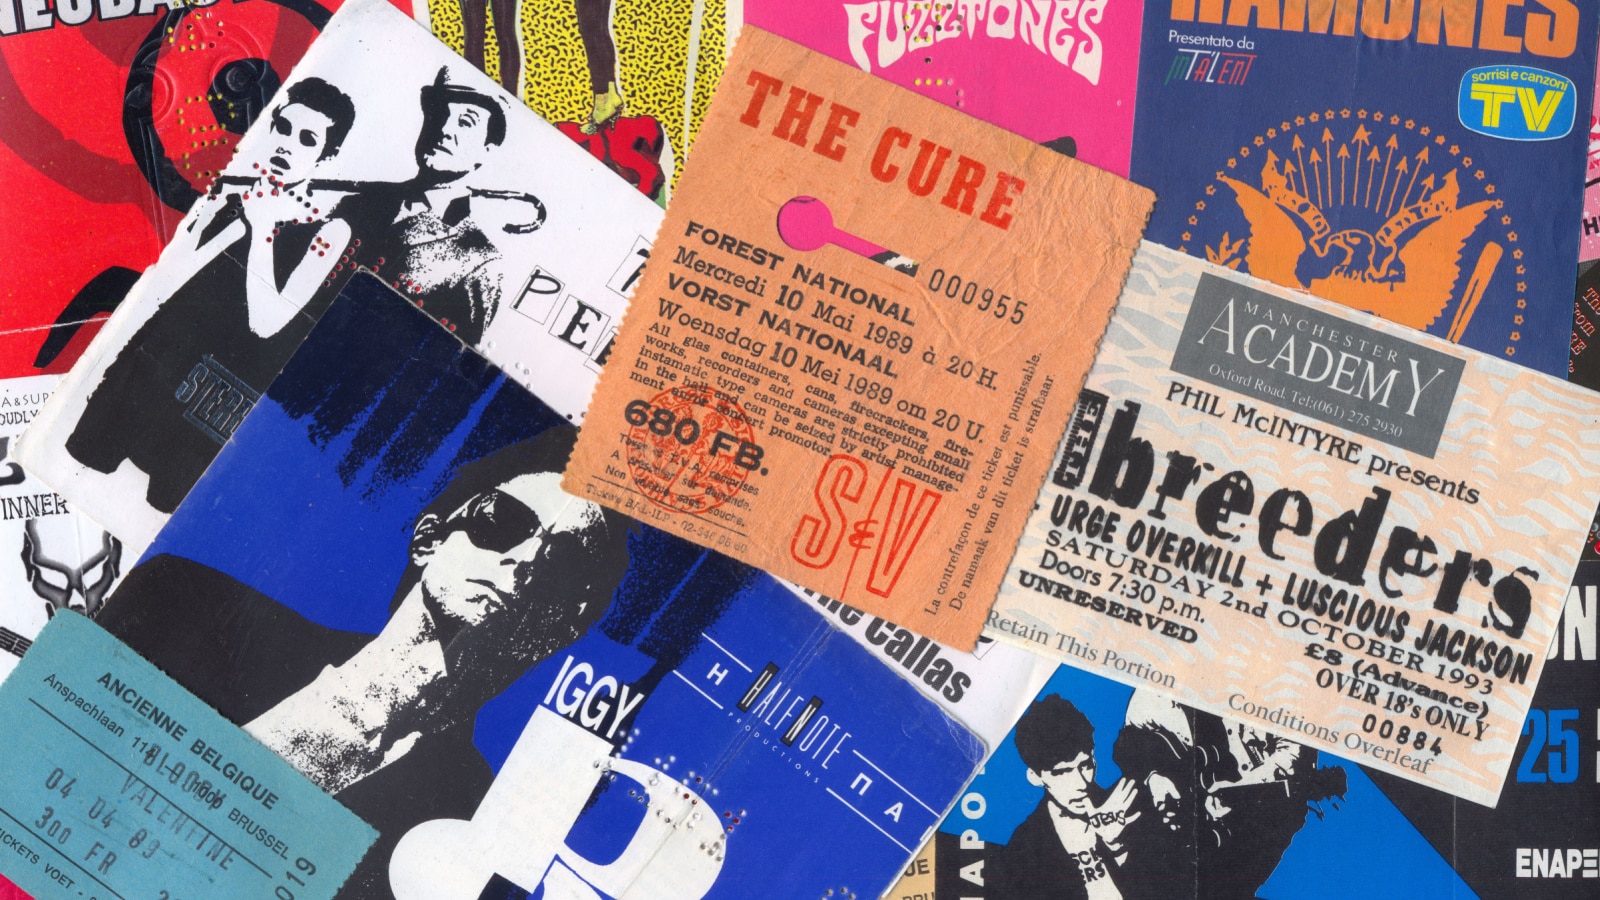 ATHENS, GREECE - DECEMBER 22, 2013: Vintage concert ticket stubs punk and alternative rock music memorabilia from the 80s and 90s.